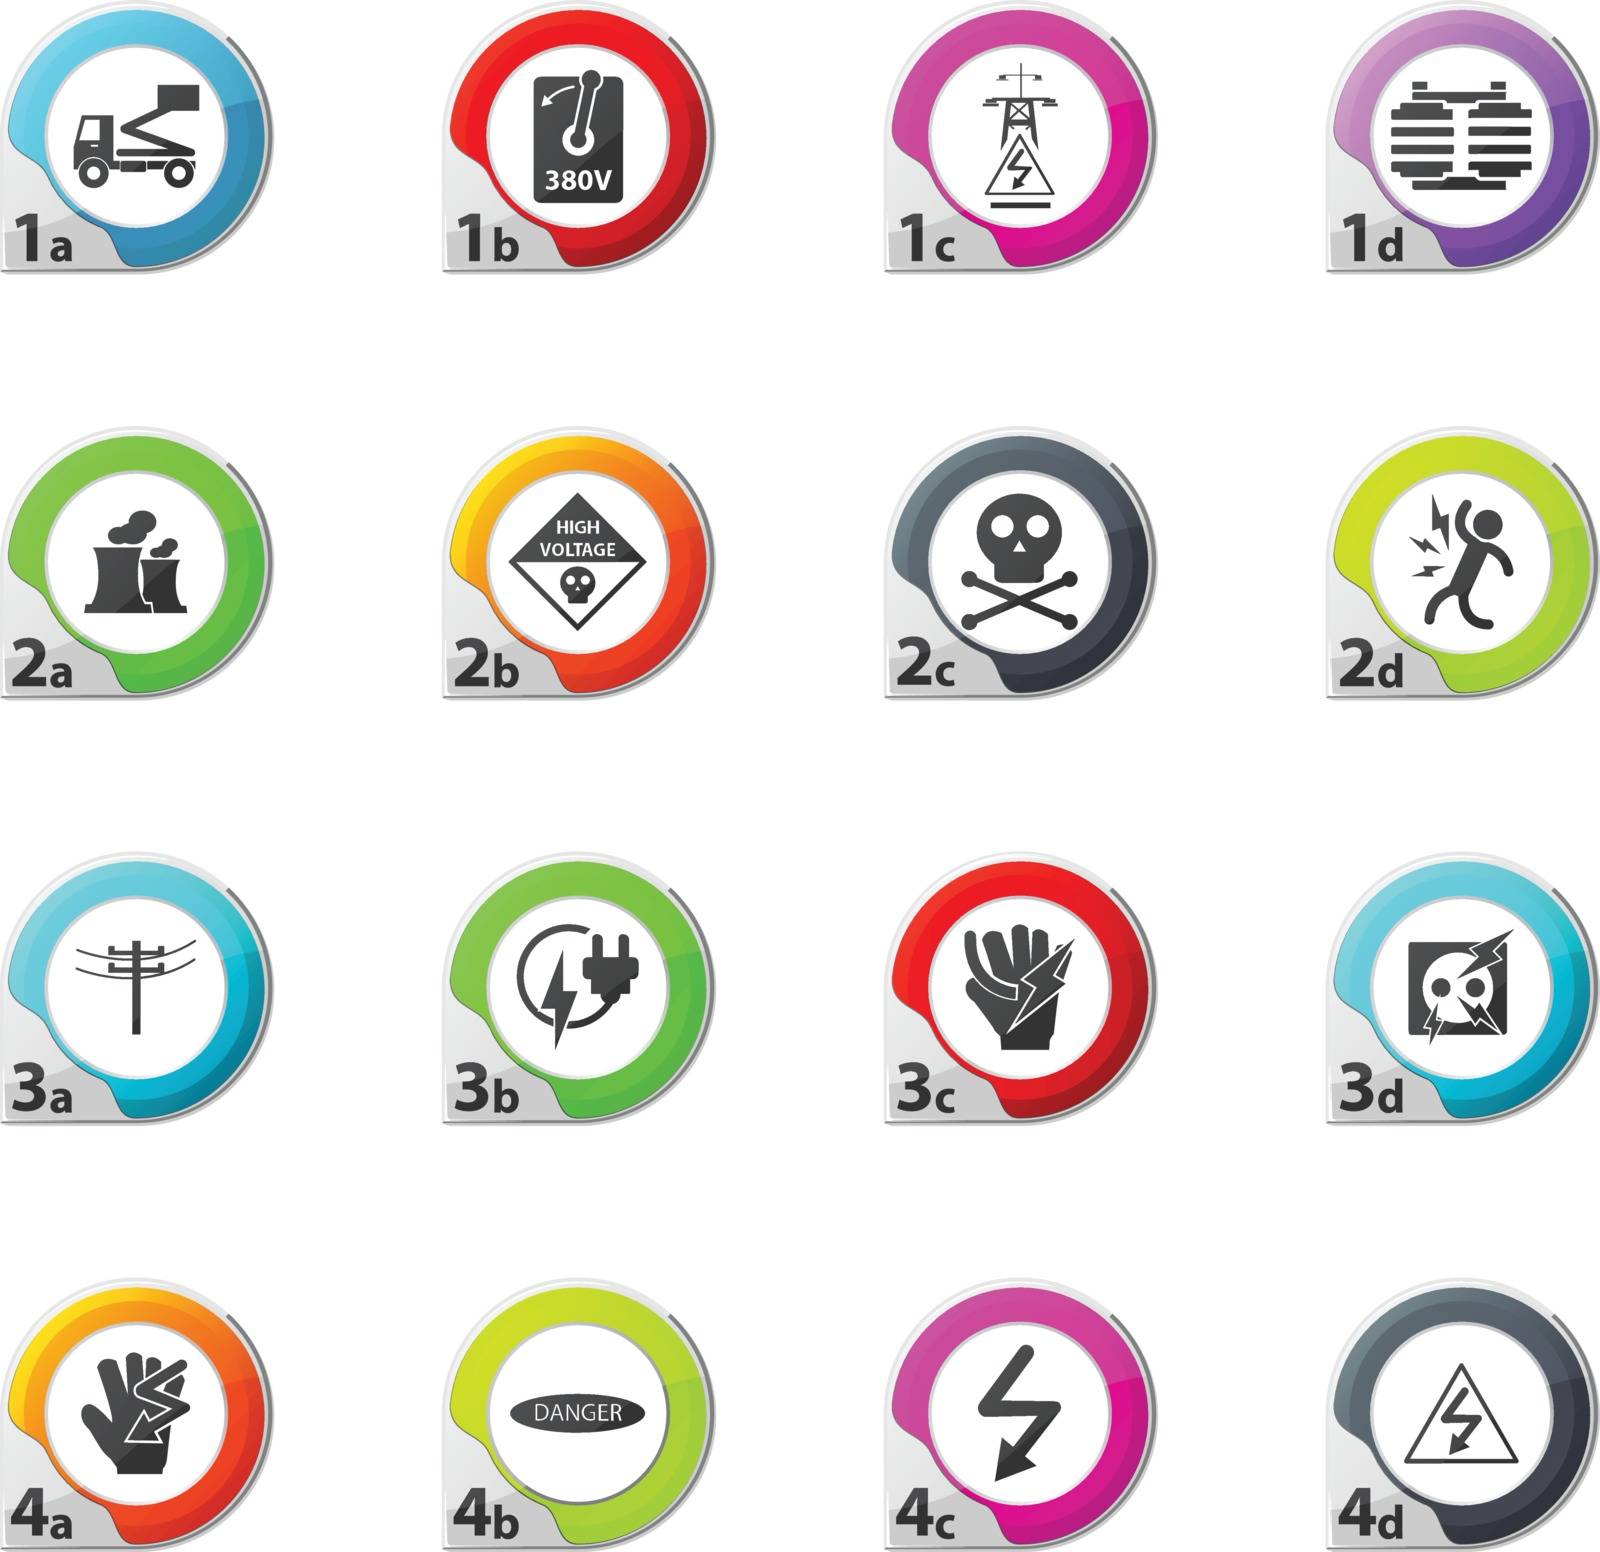 High voltage web icons for user interface design